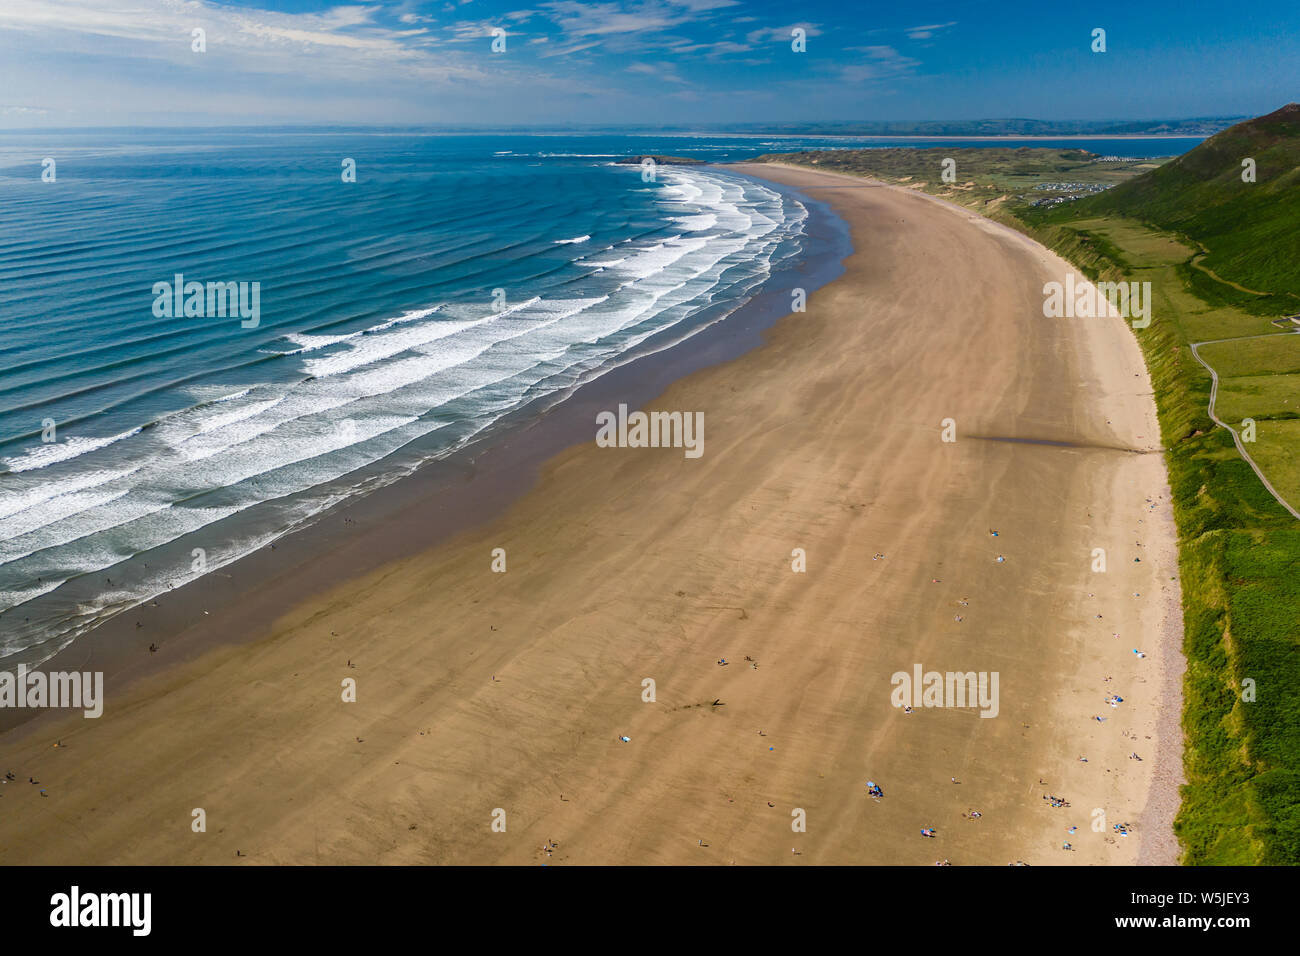 Aerial view of a huge, golden sandy beach and ocean surf Stock Photo